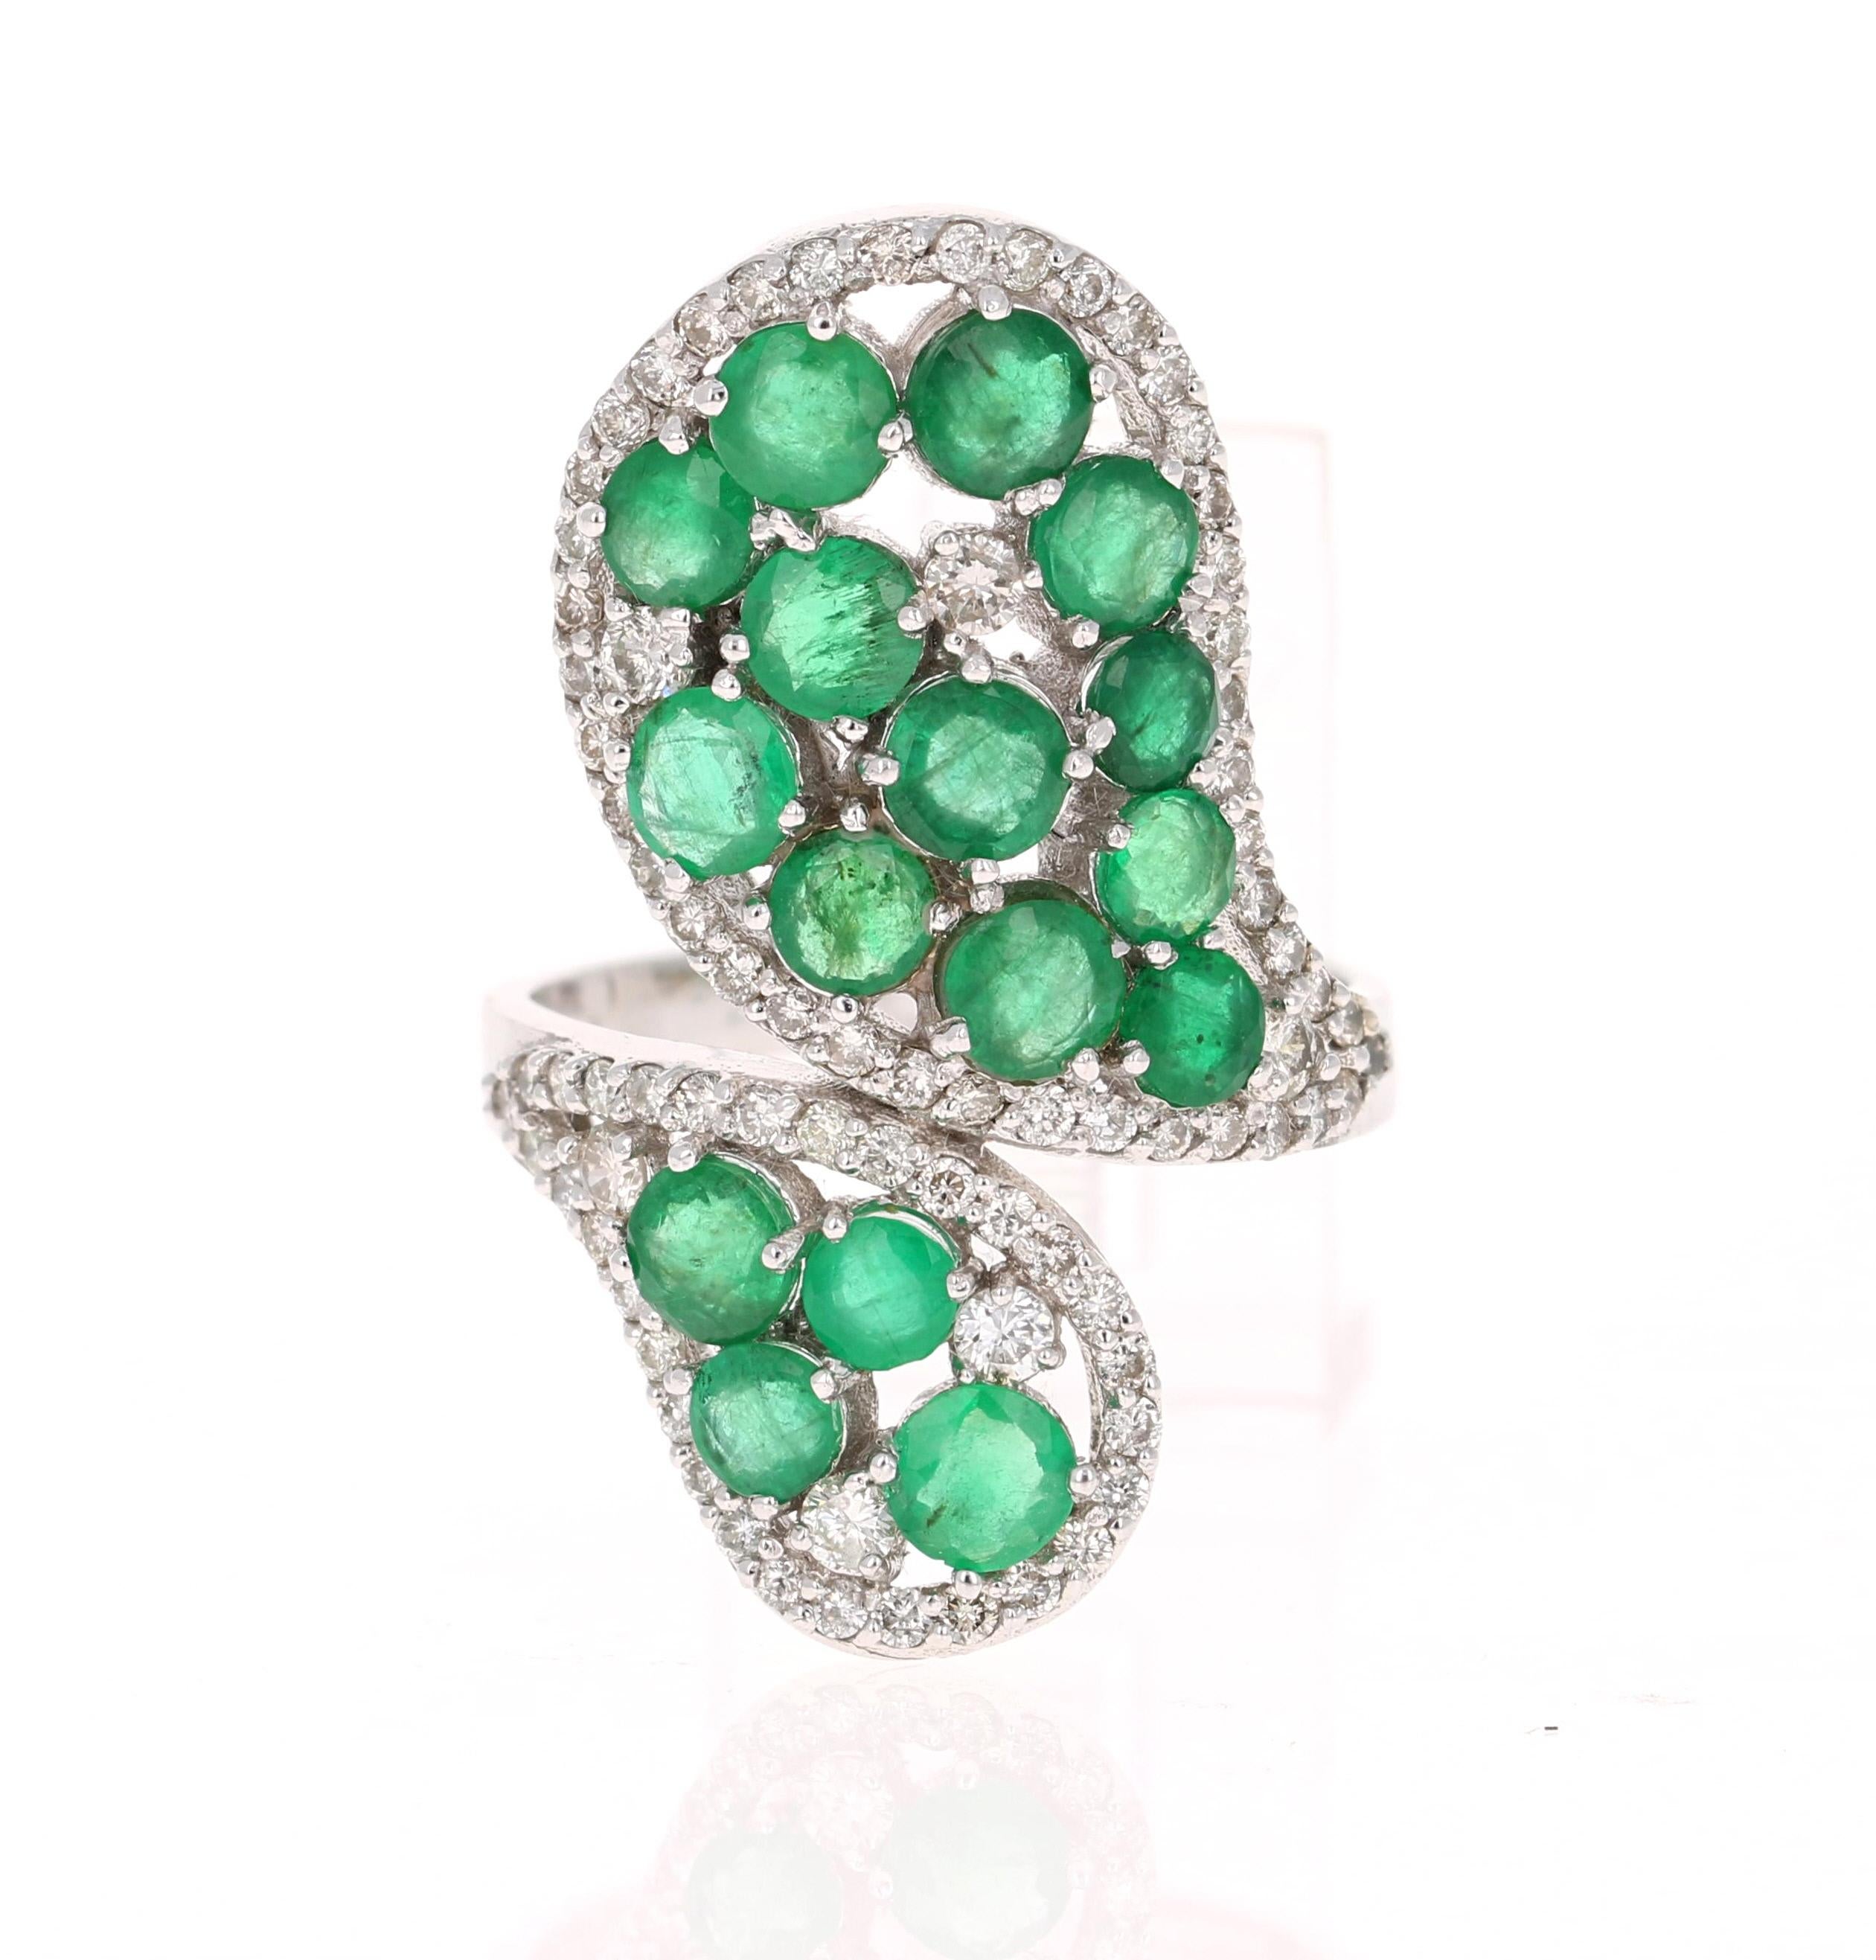 This Emerald ring is absolutely gorgeous. 

Natural Round Cut Emeralds weighing 3.31 Carats 
79 Round Cut Diamonds weighing 0.94 Carats
The total carat weight of the ring is 4.25 Carats

This ring is curated in 14 Karat White Gold and weighs